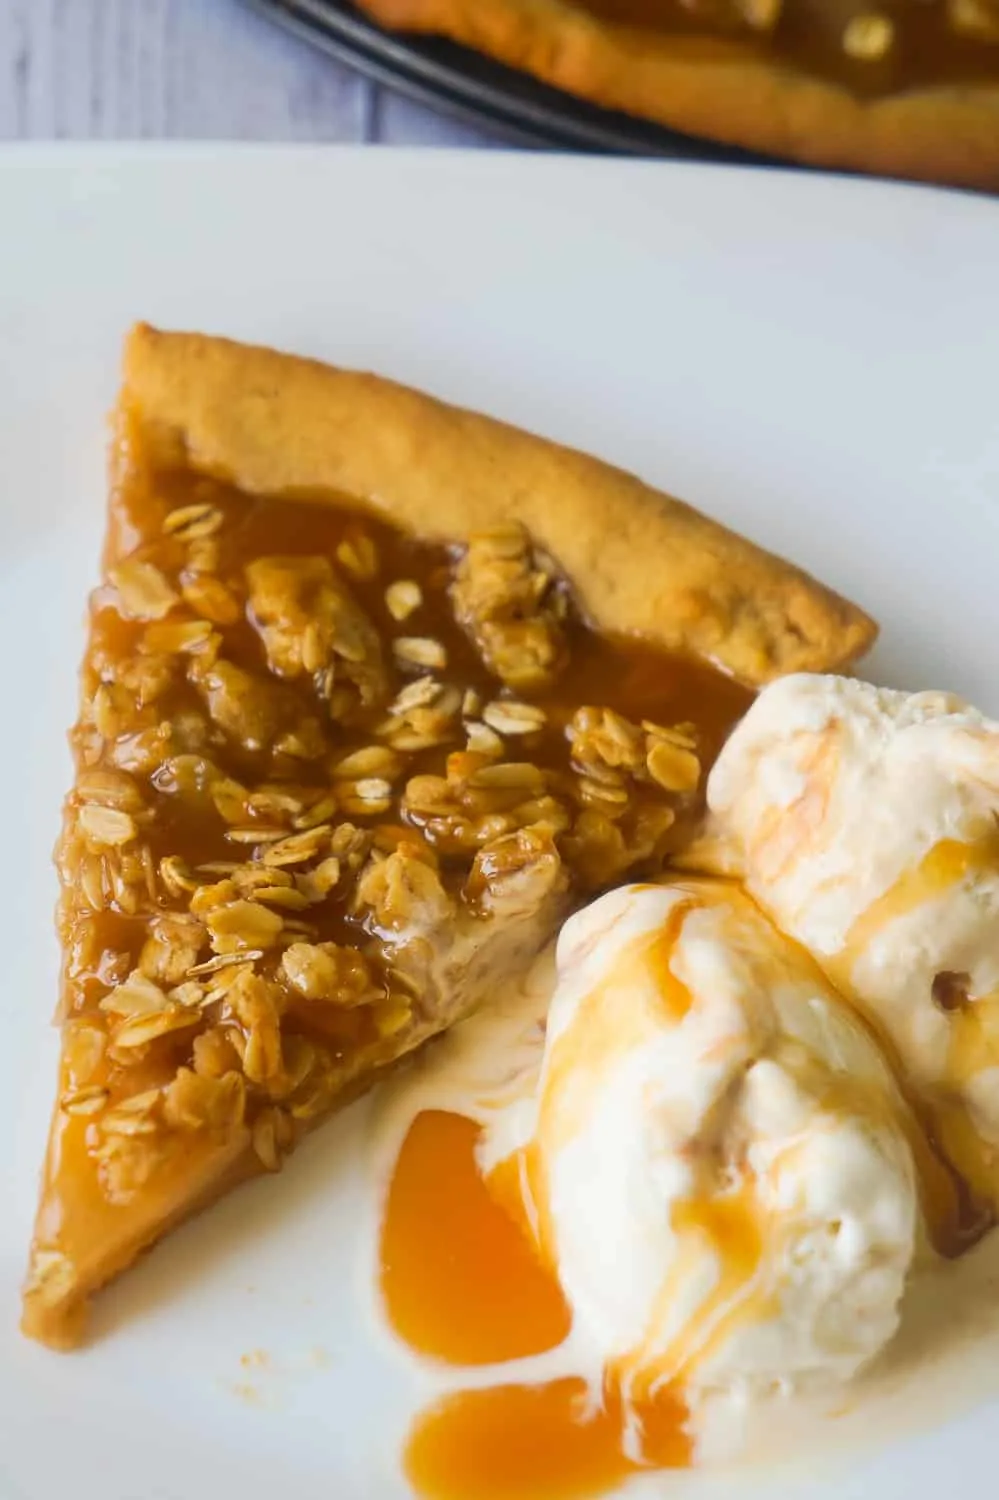 Peanut Butter Apple Pie Cookie Pizza is an easy dessert recipe for peanut butter lovers. A peanut butter cookie crust is topped with apple pie filling, peanut butter oat crumble and drizzled with caramel syrup.